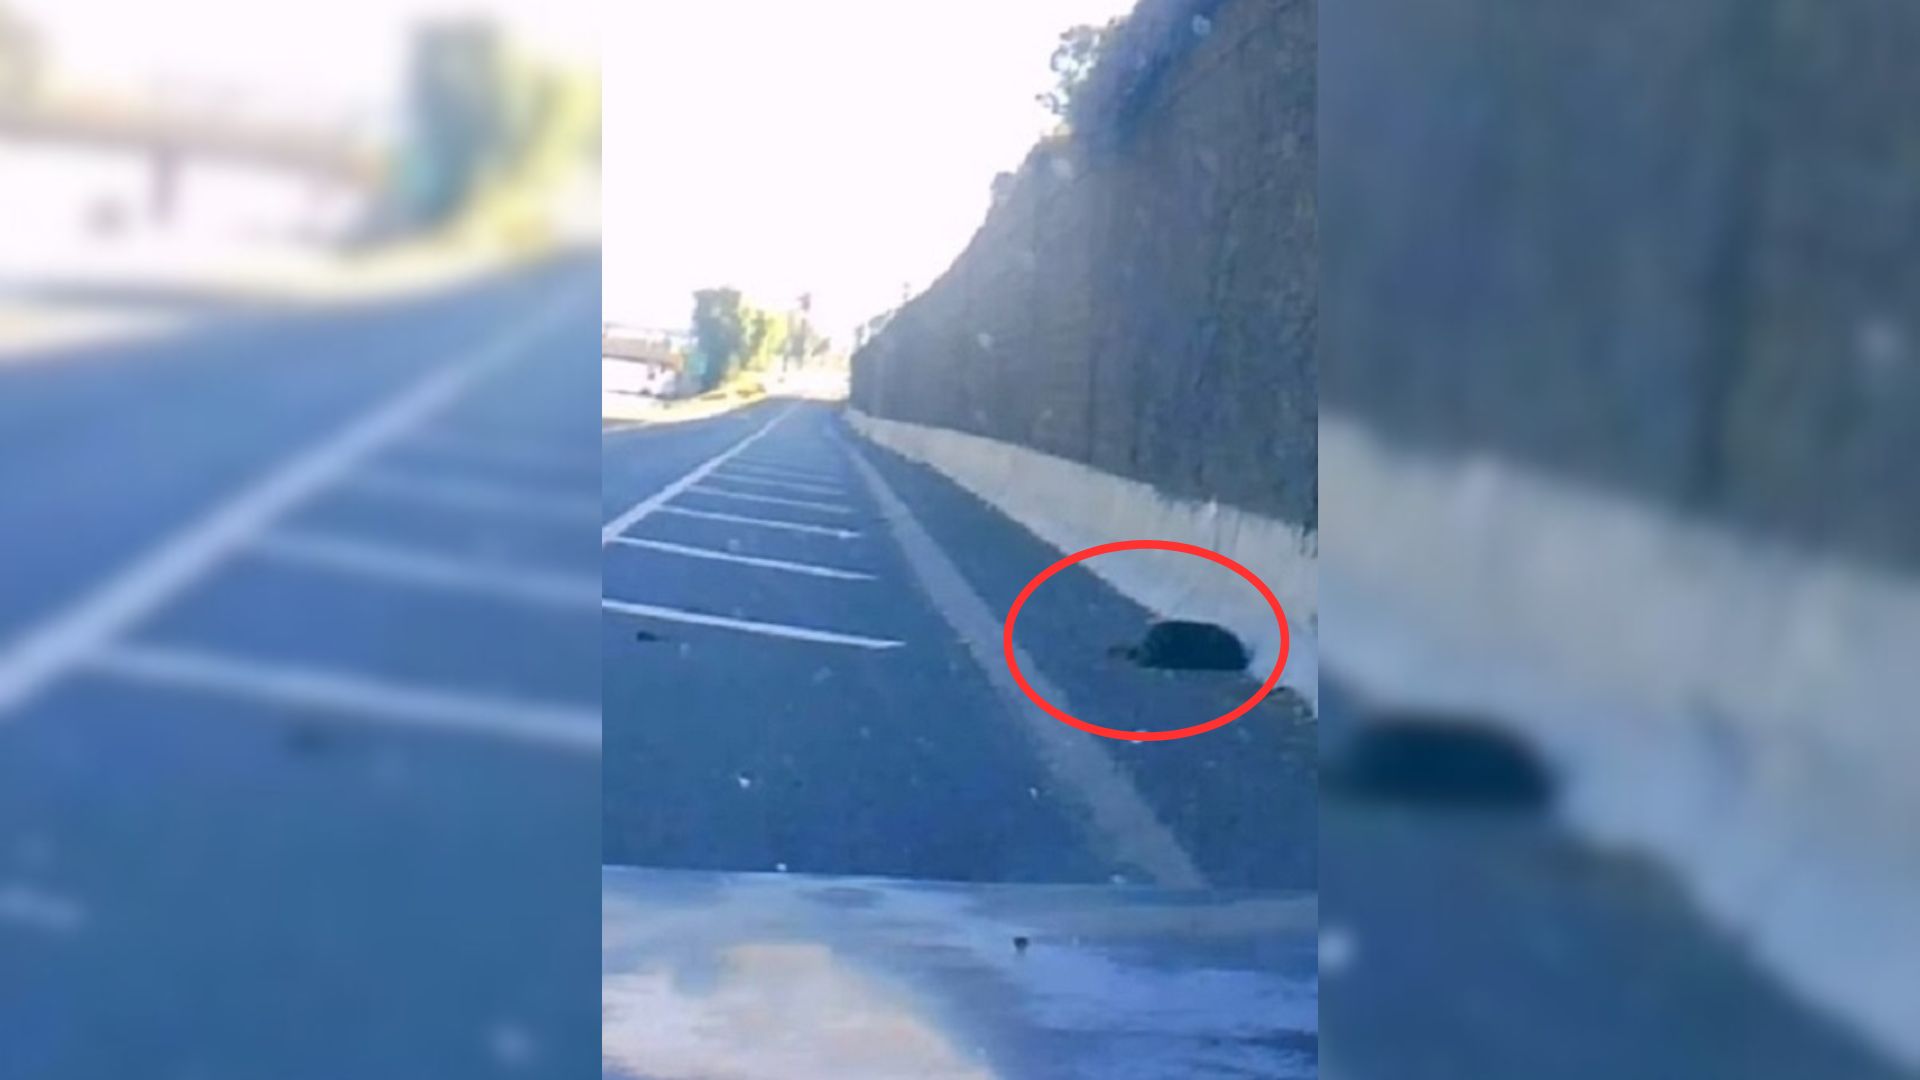 Driver Shocked To Find A Motionless Dog Lying On The Road, Then Realizes It’s Still Breathing